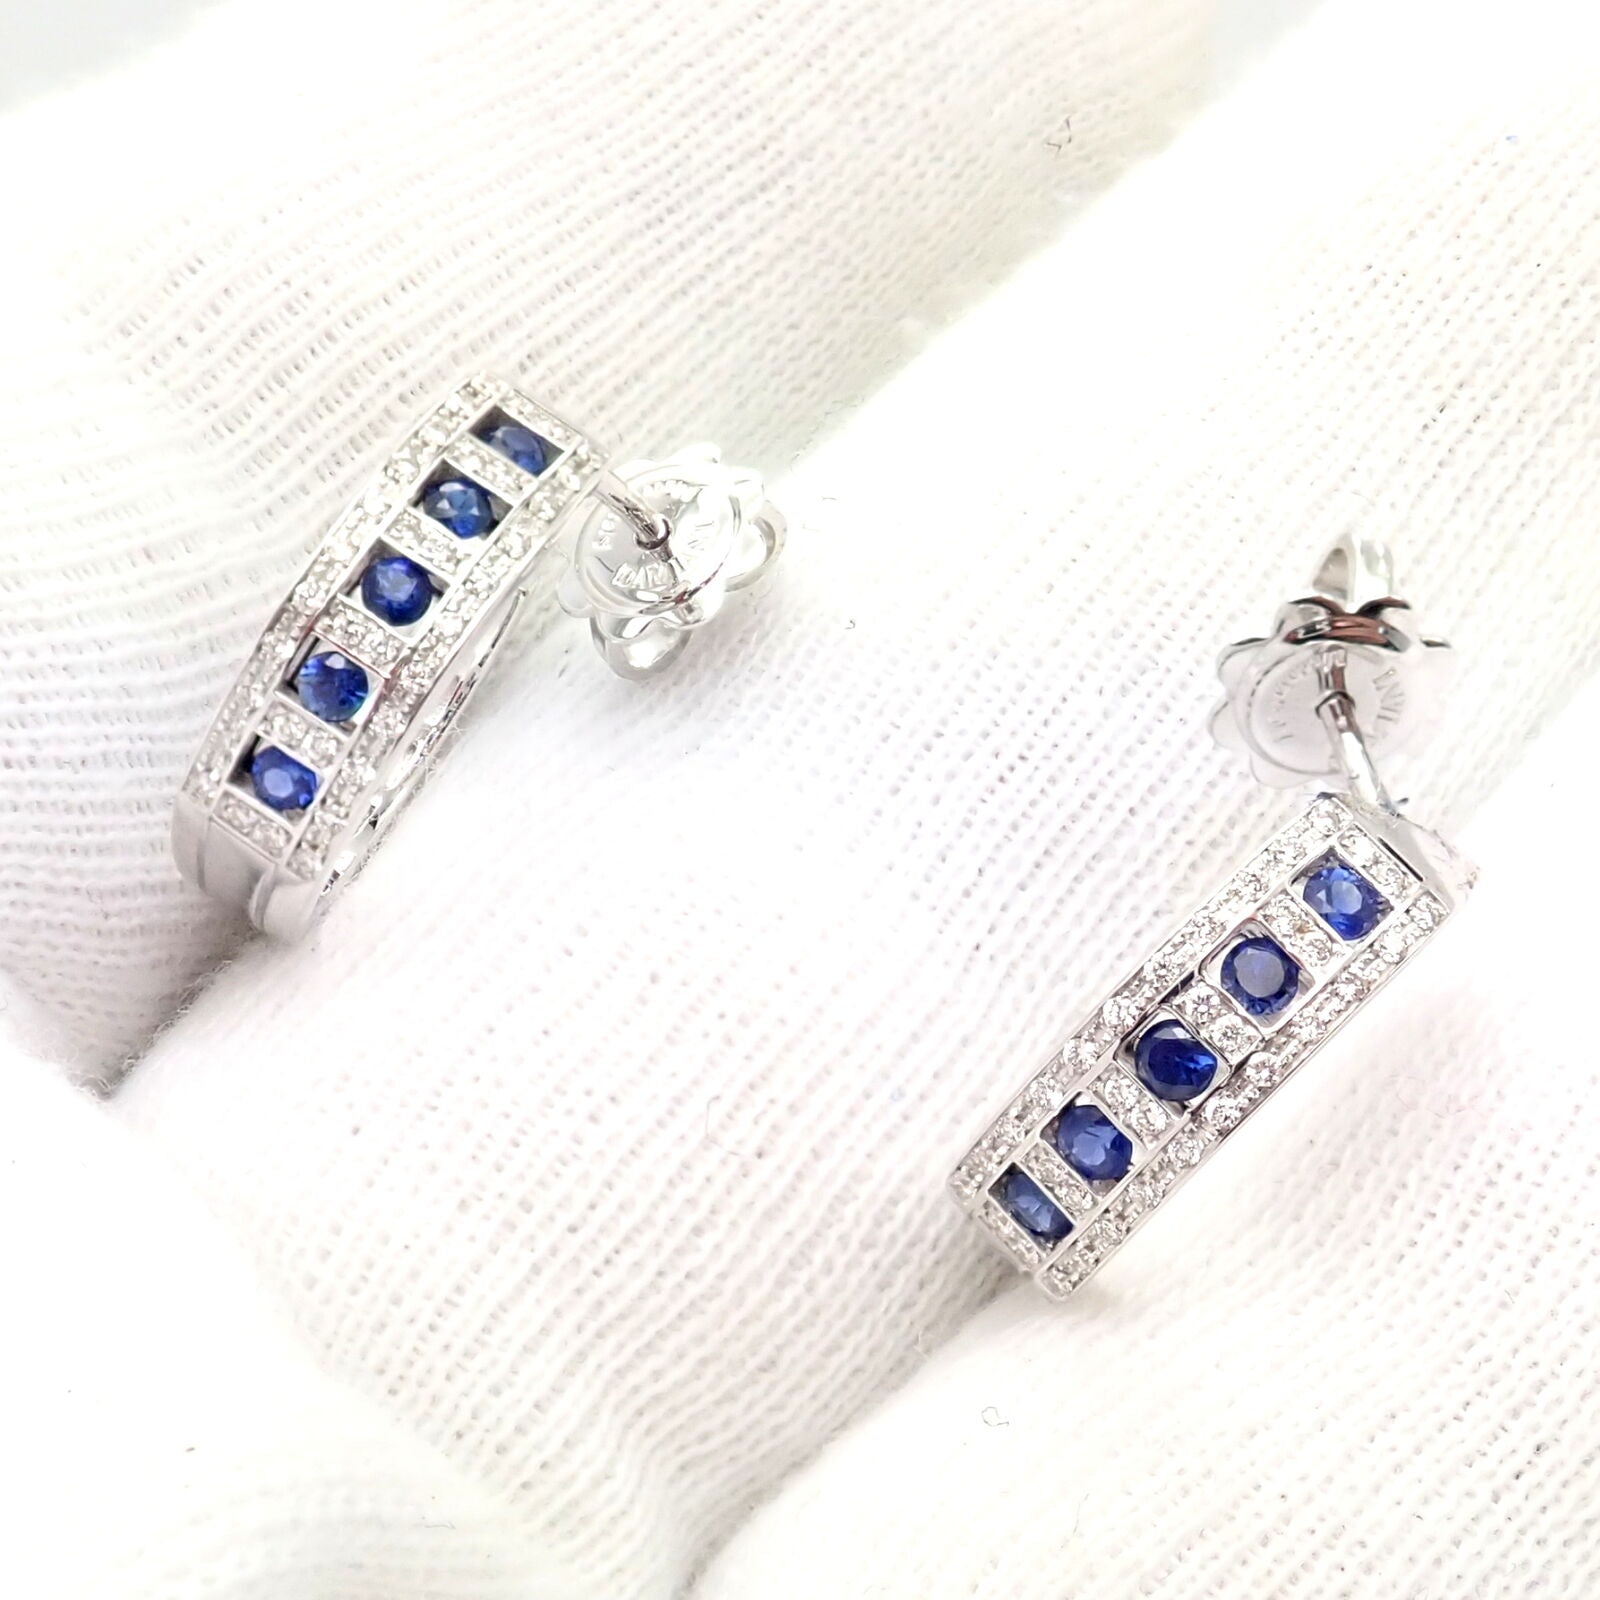 Damiani Jewelry & Watches:Fine Jewelry:Earrings New Authentic! Damiani 18k White Gold Diamond Sapphire Belle Epoque Earrings